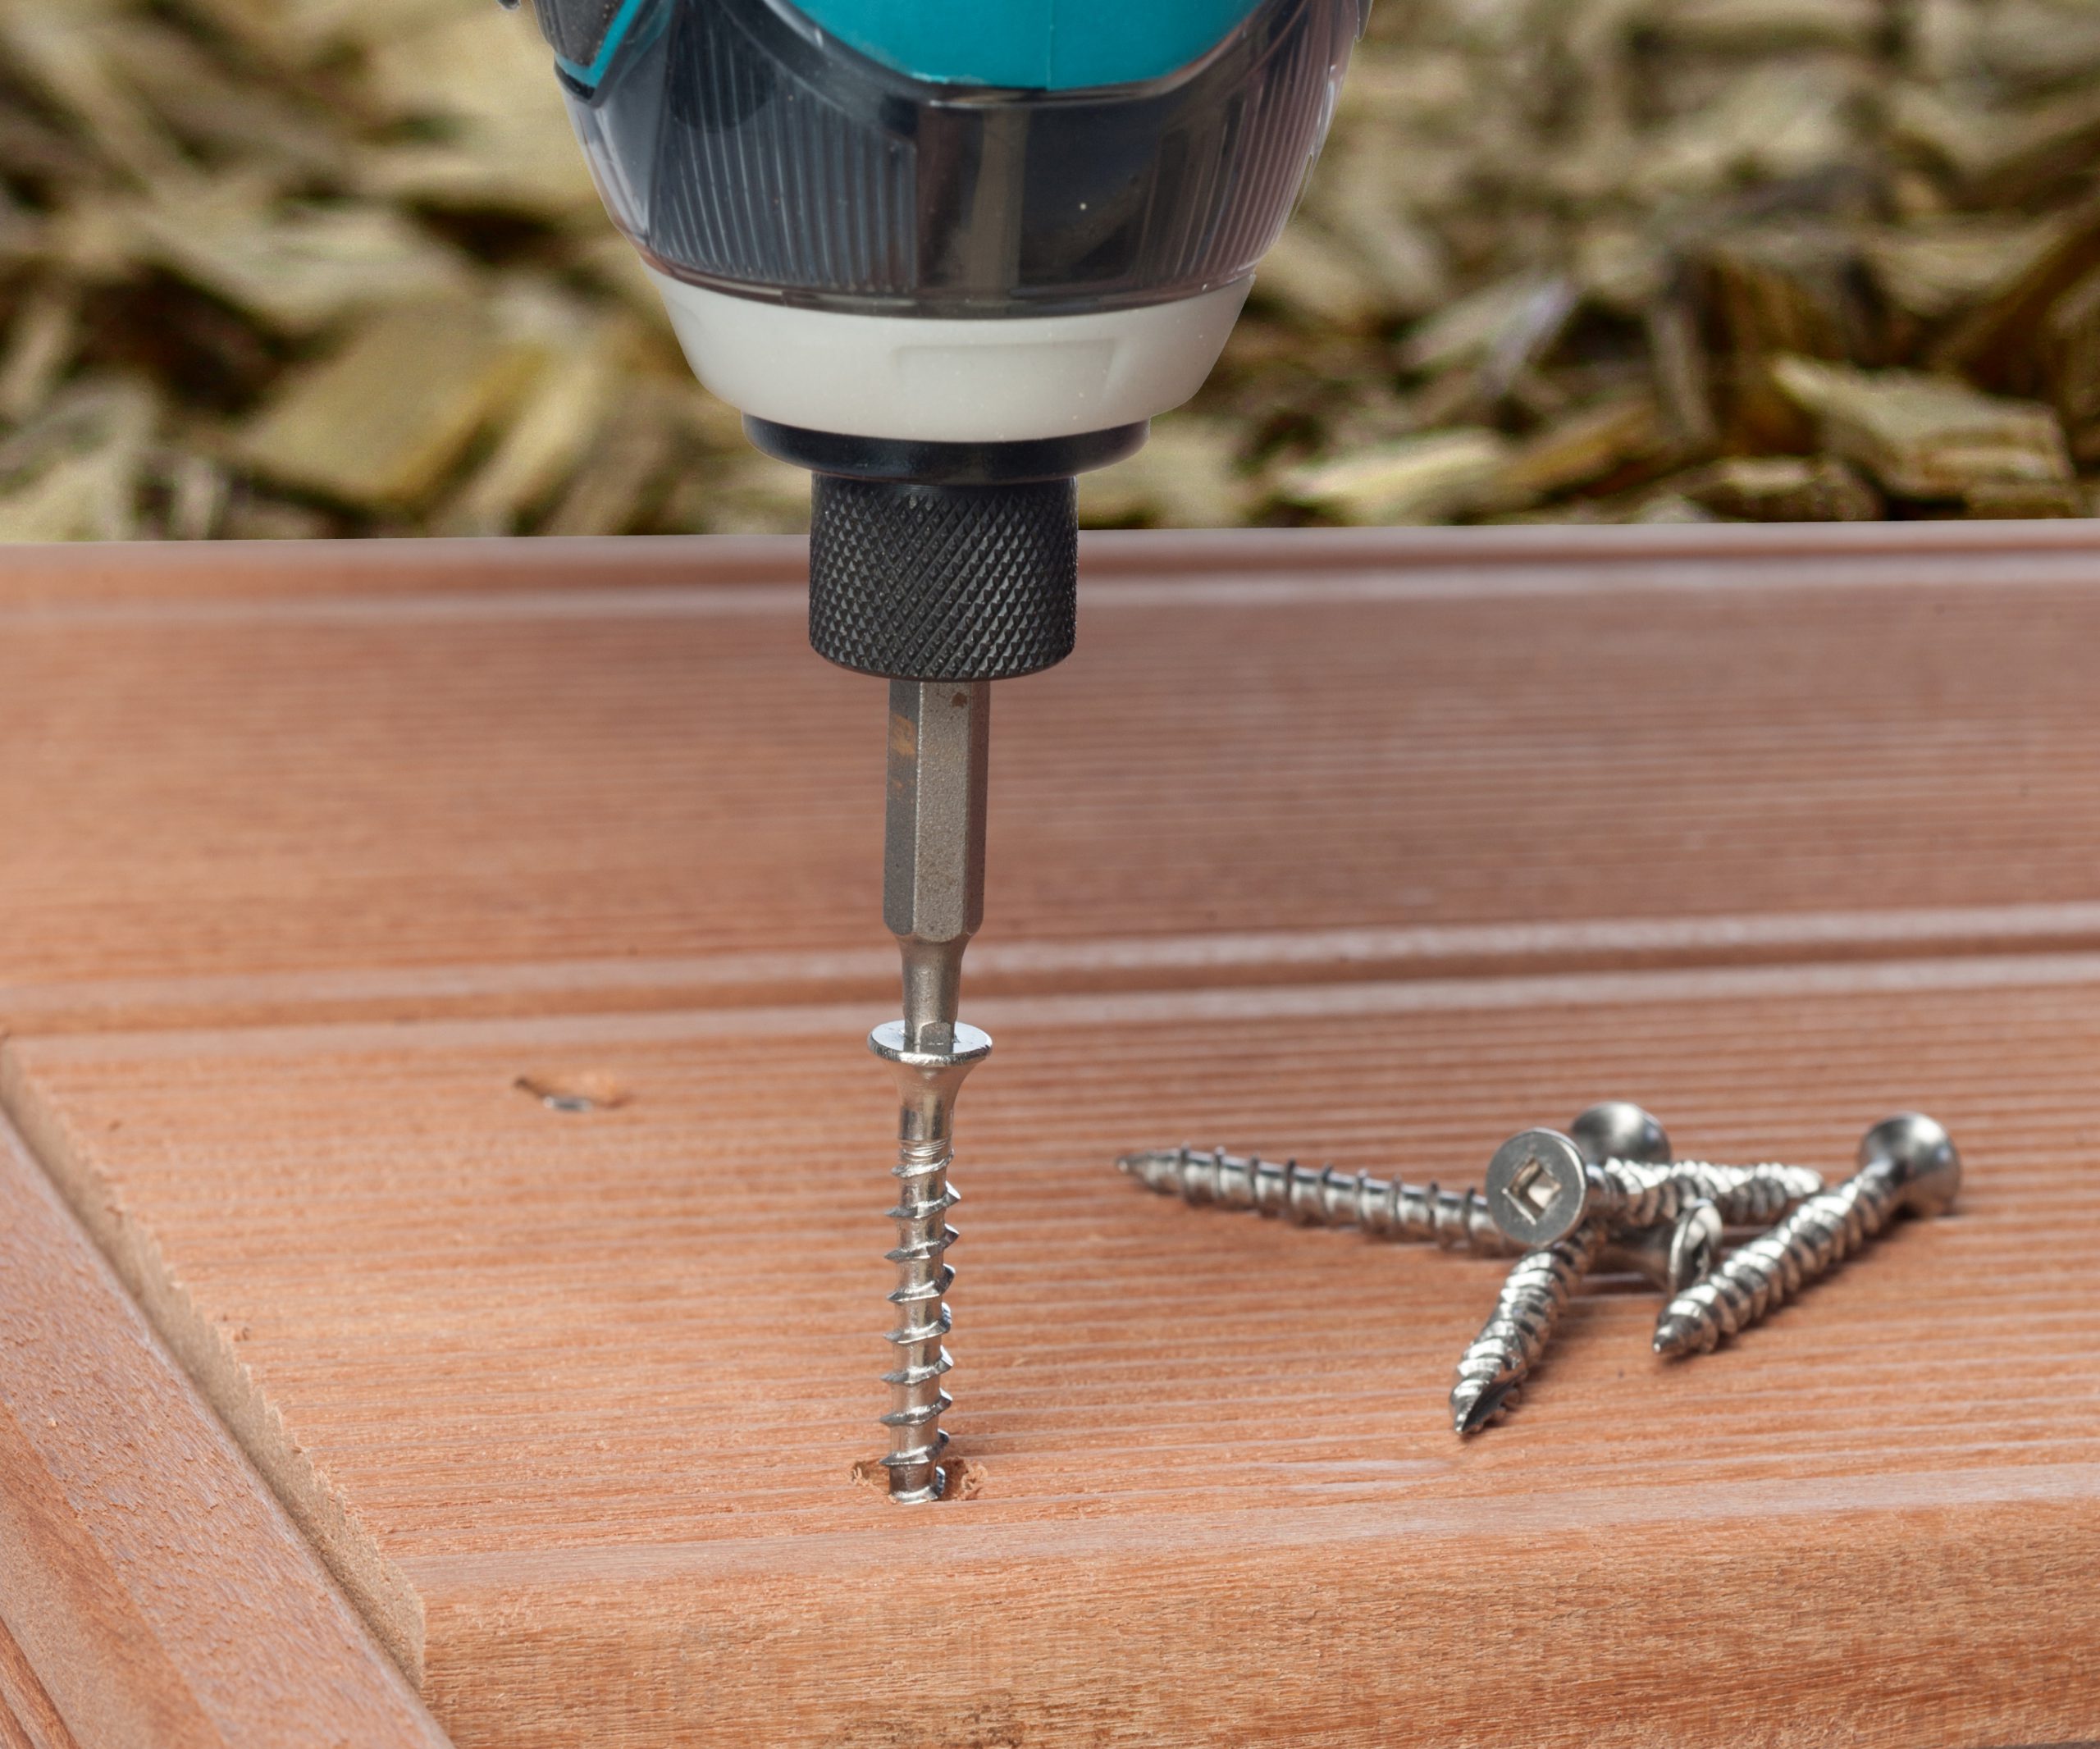 The Usefulness of Self-Drilling Screws